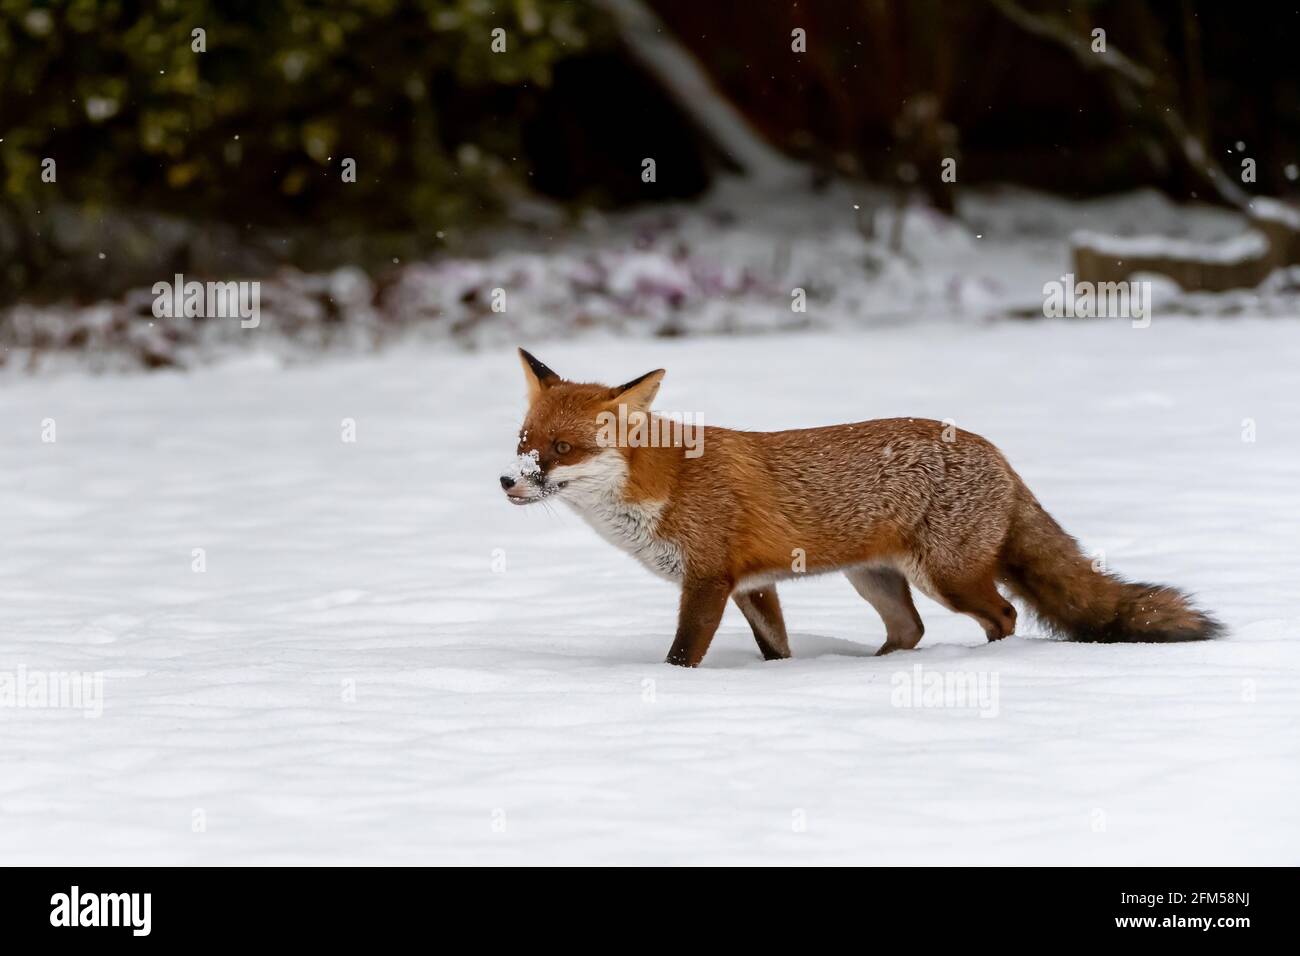 An urban fox, with snow on its snout, wades through deep snow Stock Photo